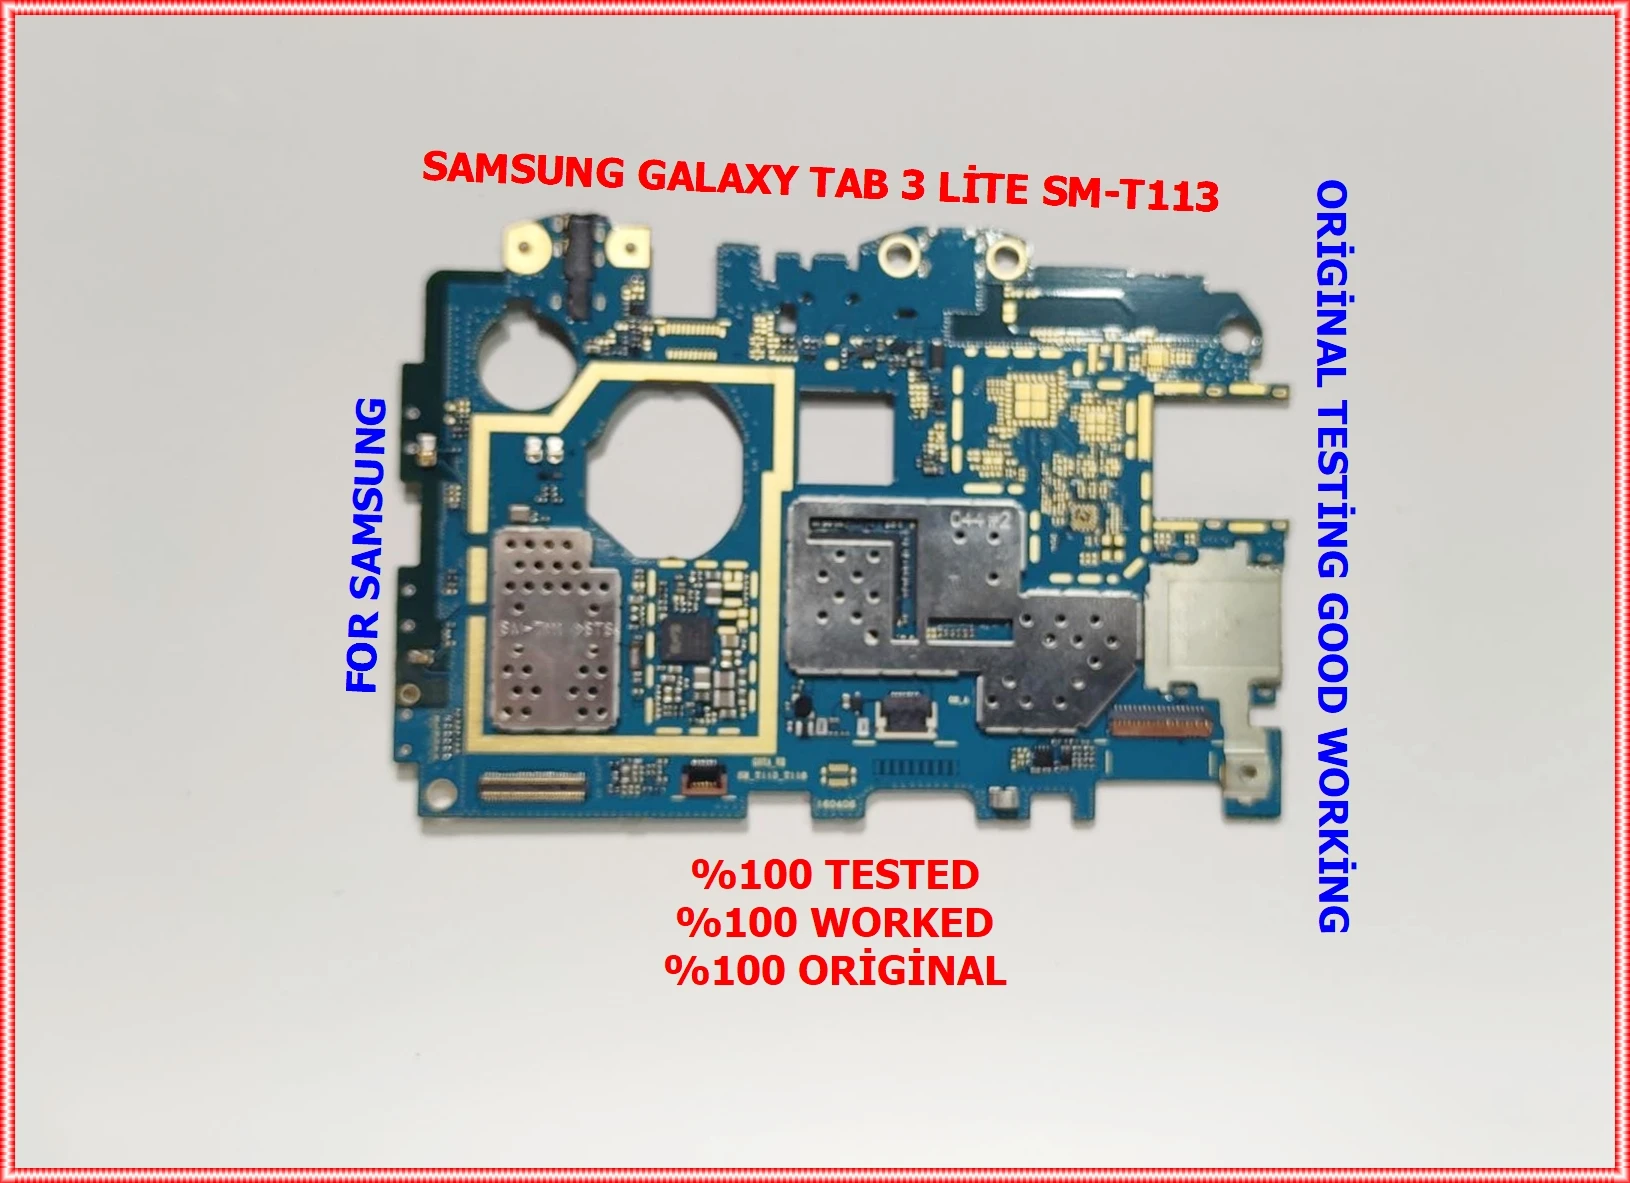 

FOR SAMSUNG SM-T113 unlocked were tested and proved successful assembly meat and ready to use